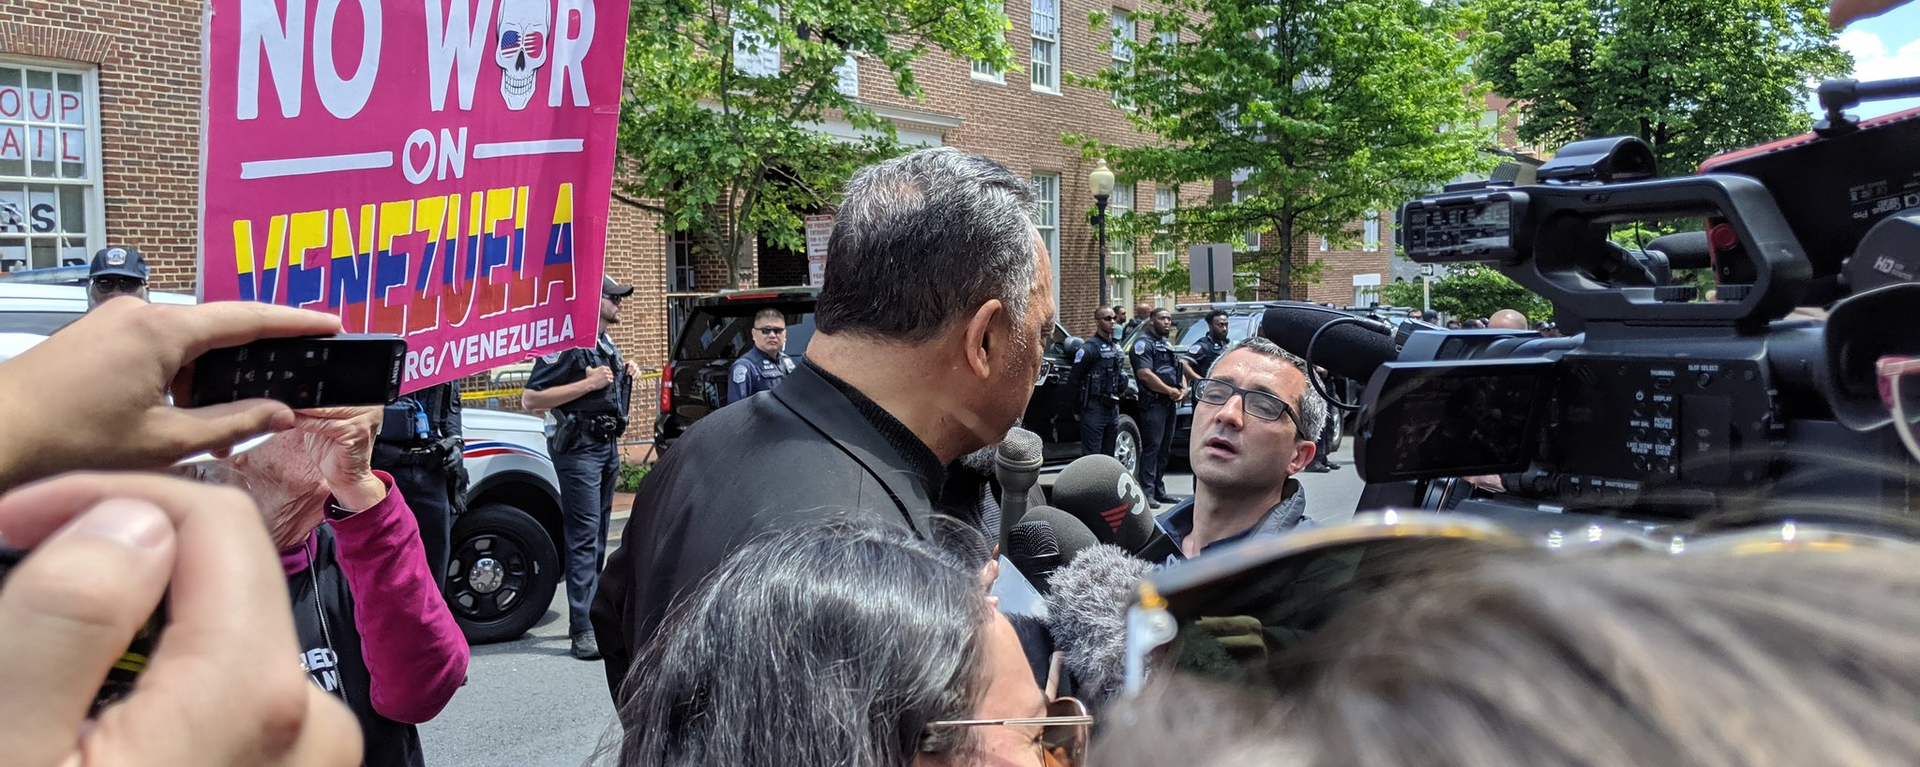 Rev. Jesse Jackson speaks to reporters after an embattled delivery of food, water, and other supplies to the Embassy Protection Collective inside the Venezuelan Embassy in Washington, DC - Sputnik International, 1920, 15.05.2019